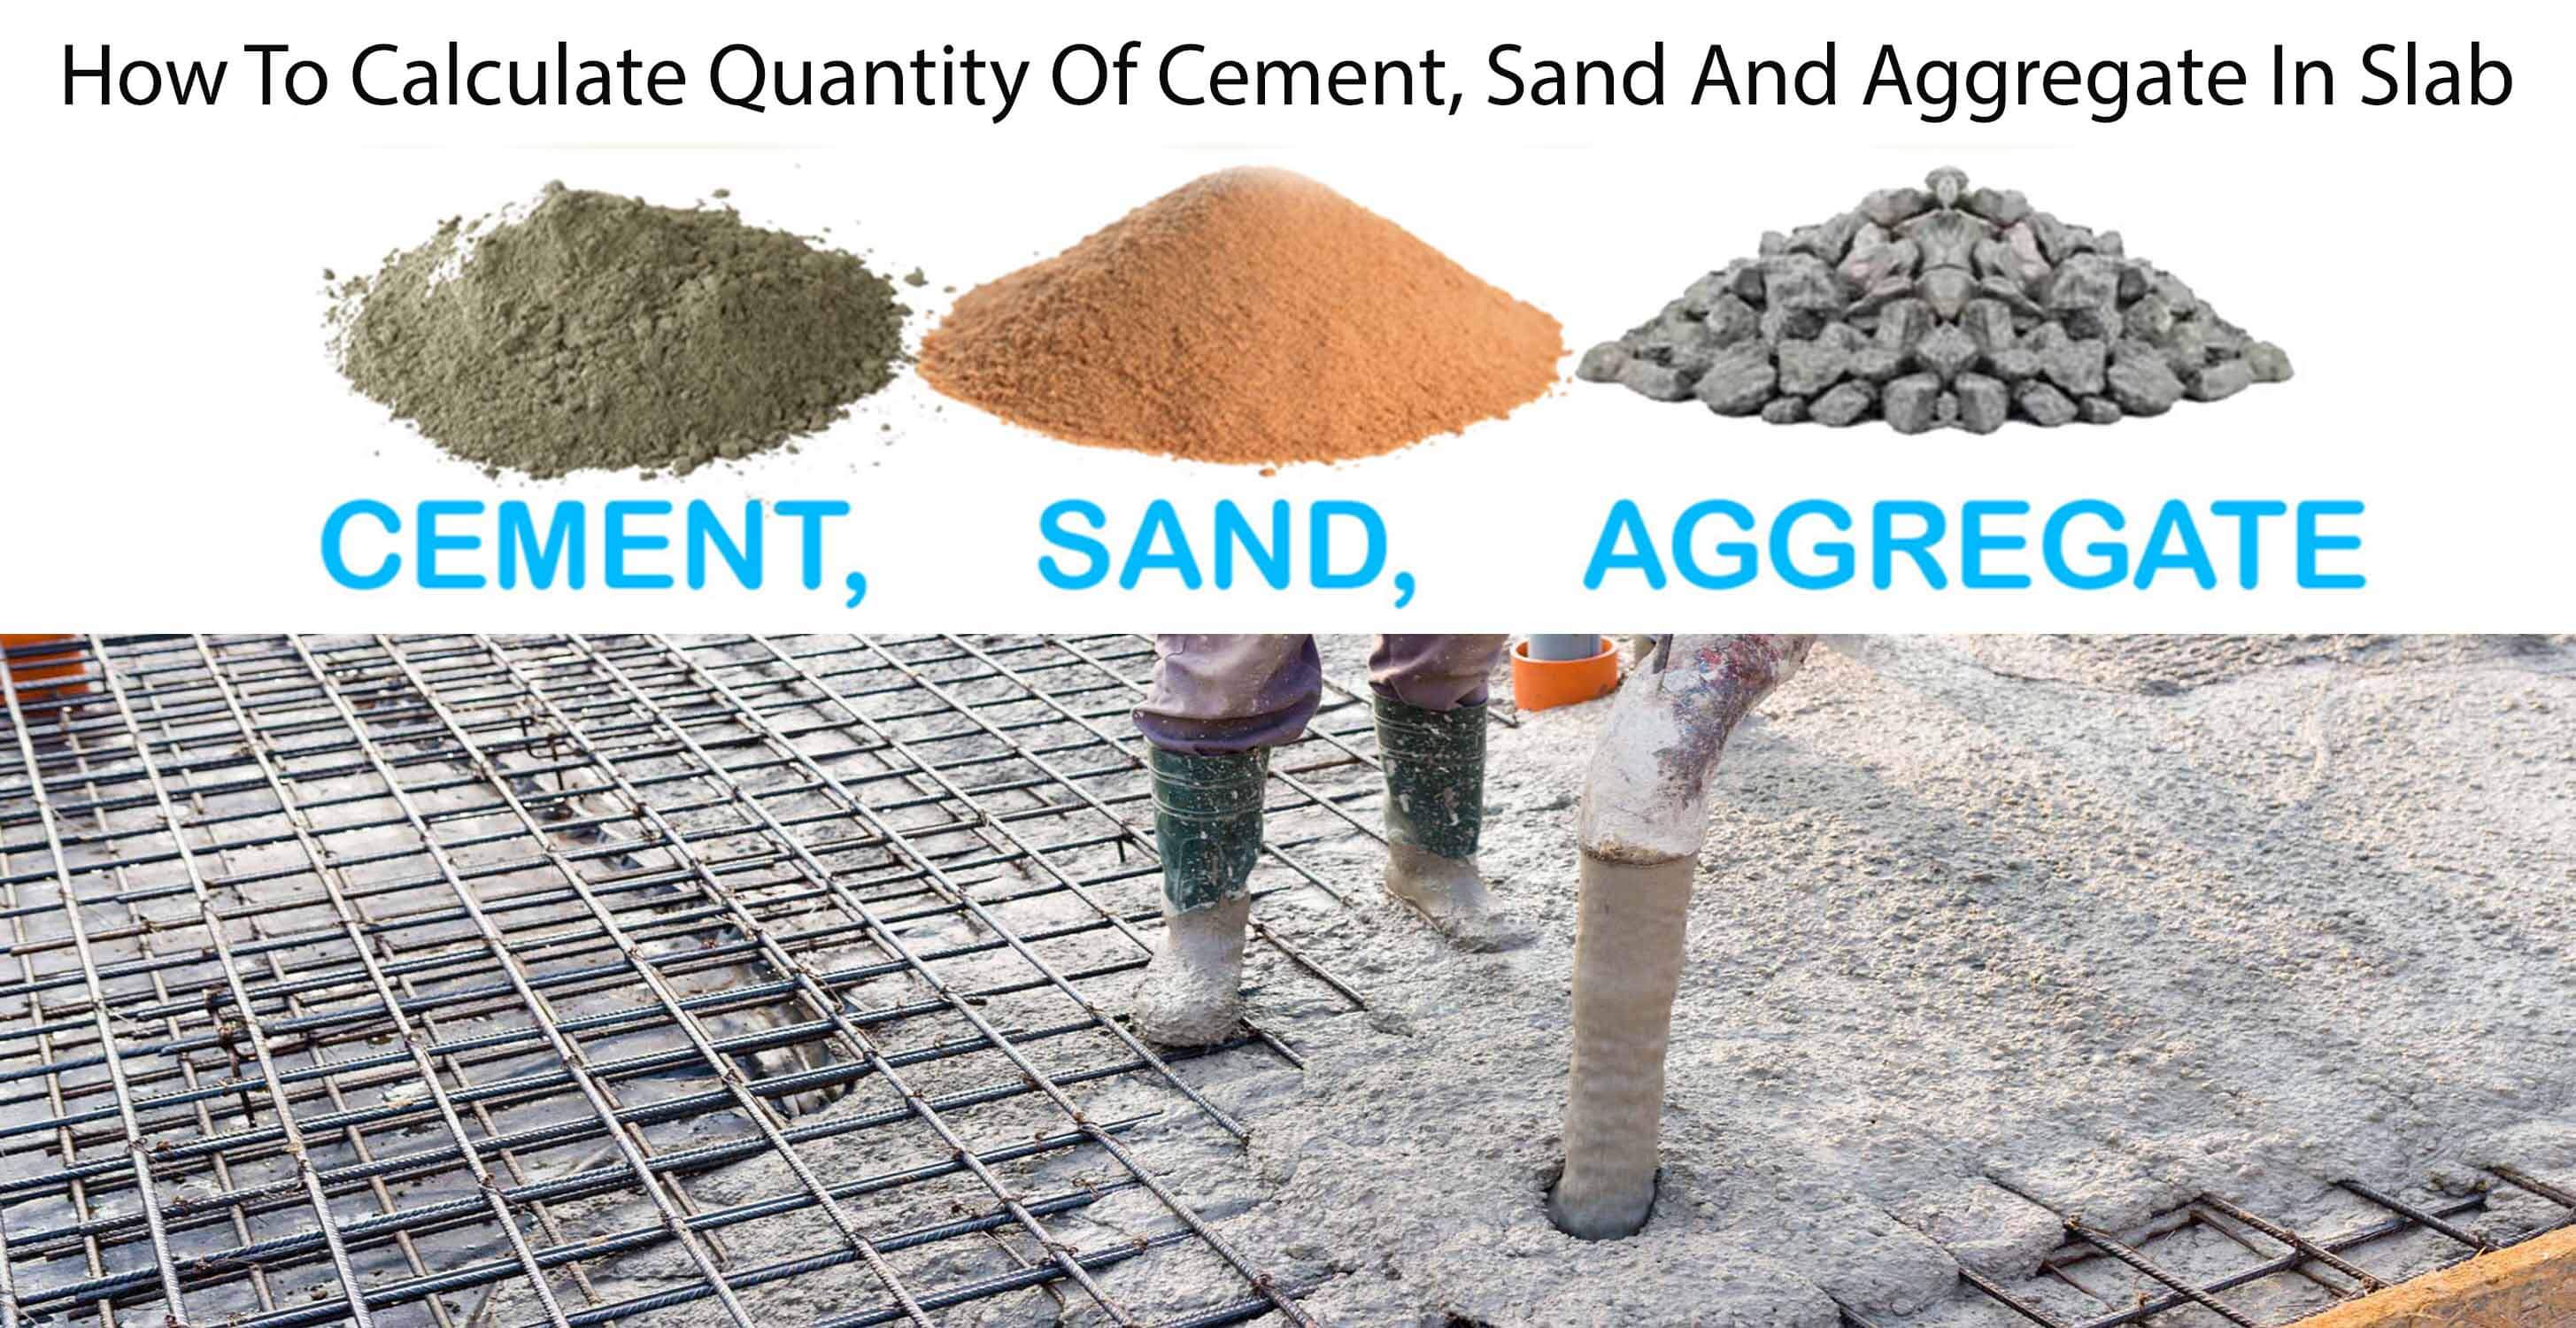 How To Calculate Quantity Of Cement, Sand And Aggregate In Slab